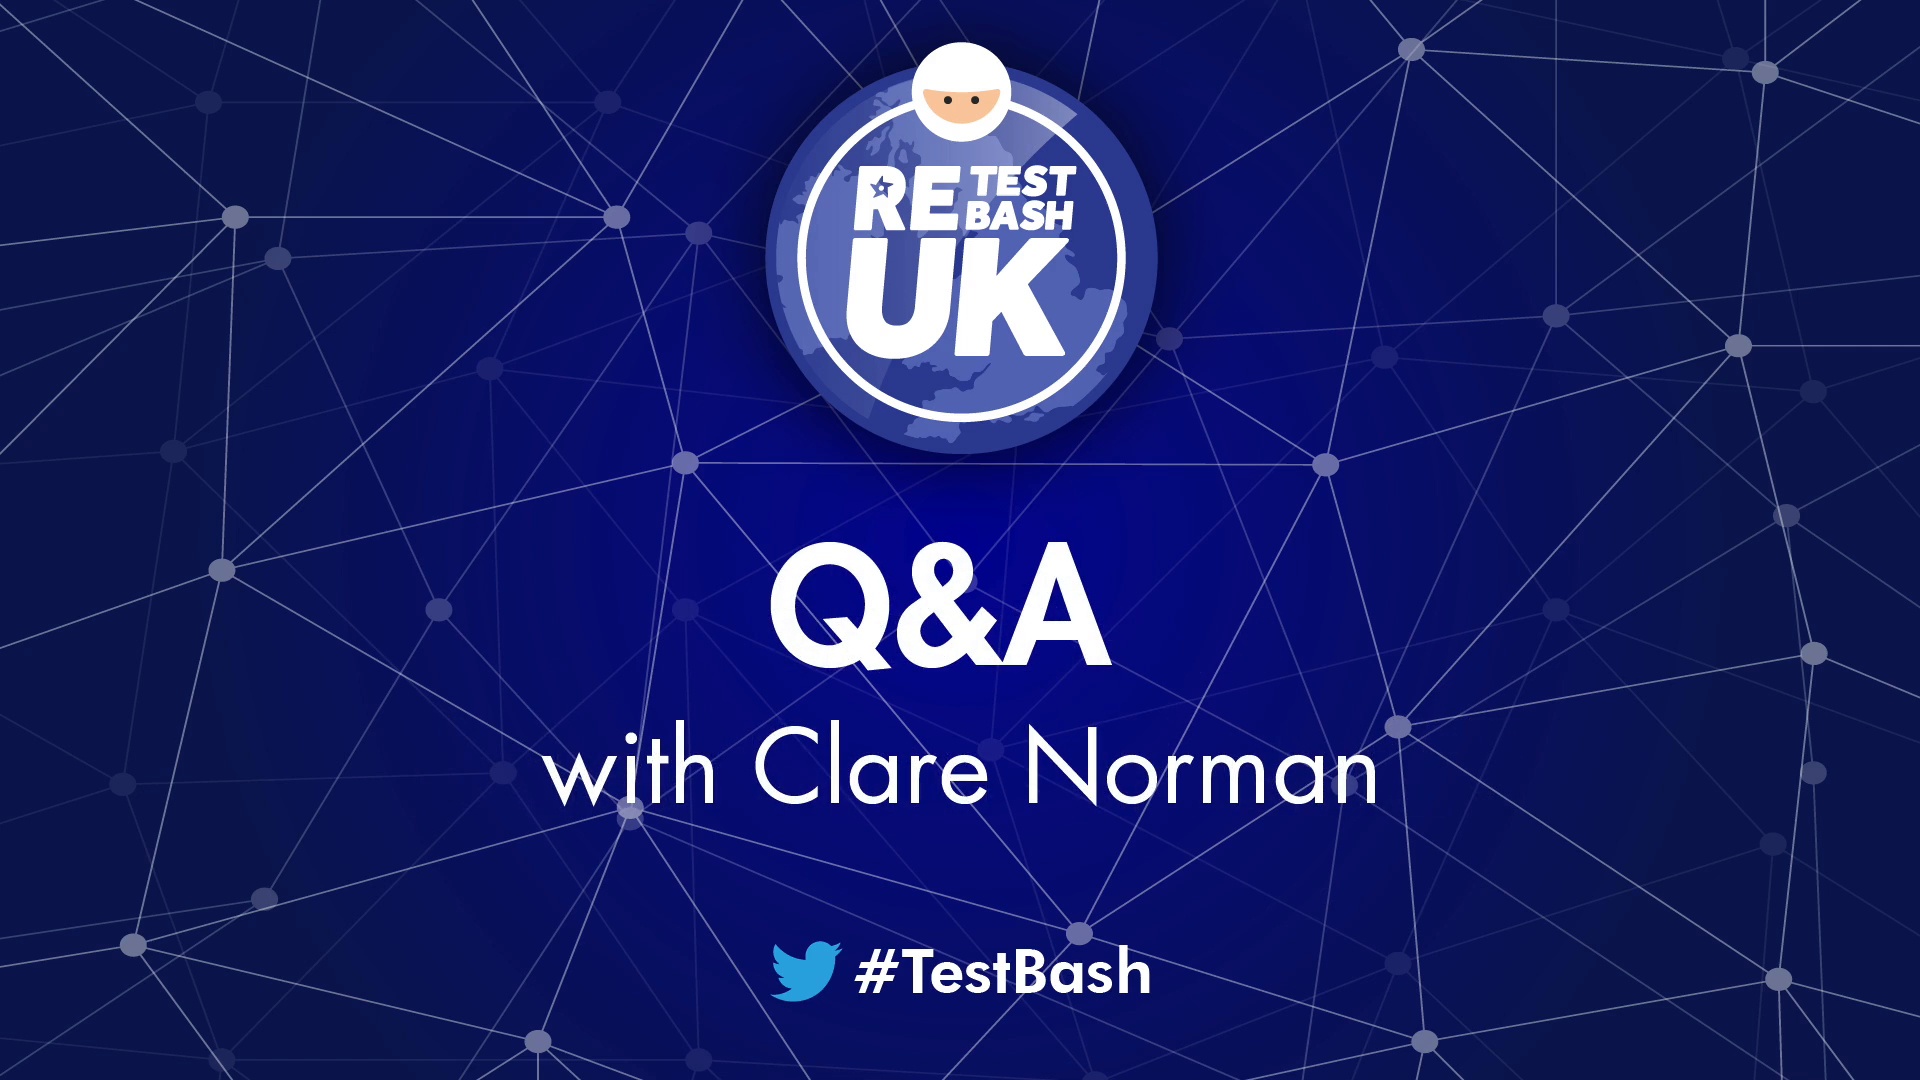 ReTestBash UK 2022: Live Q&A with Clare Norman